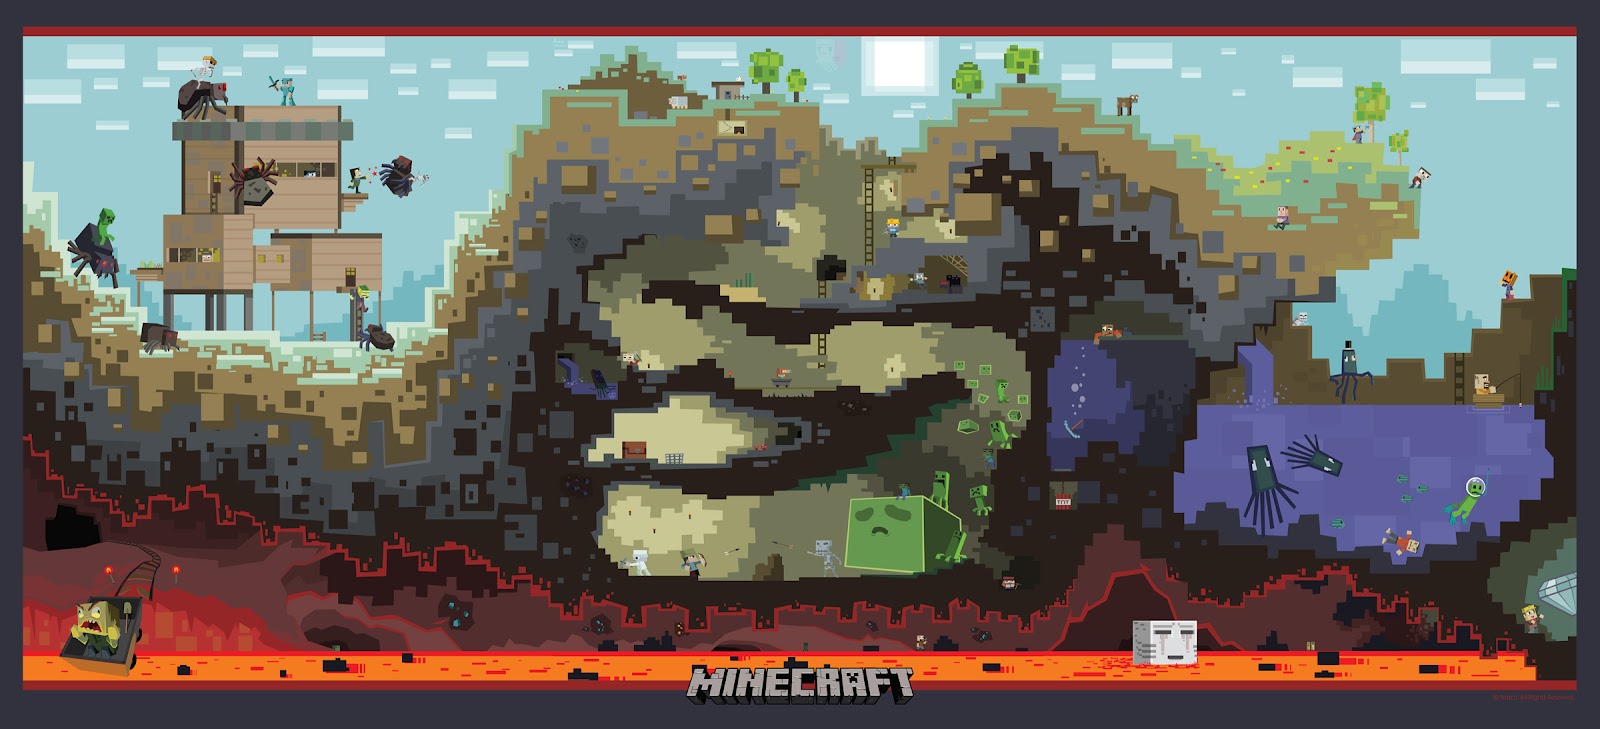 Minecraft Official Poster